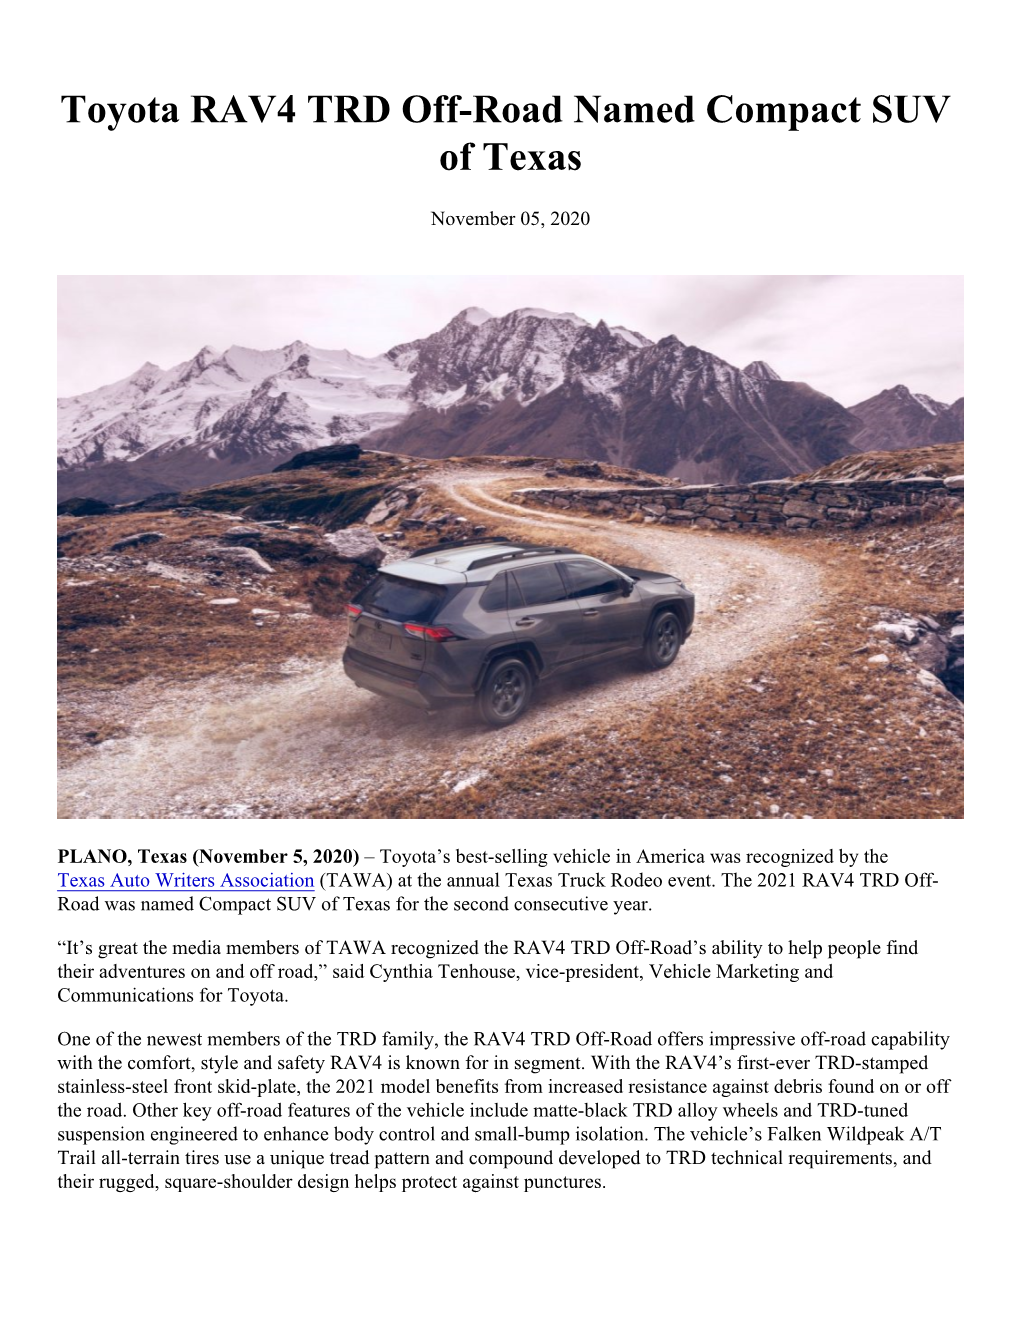 Toyota RAV4 TRD Off-Road Named Compact SUV of Texas